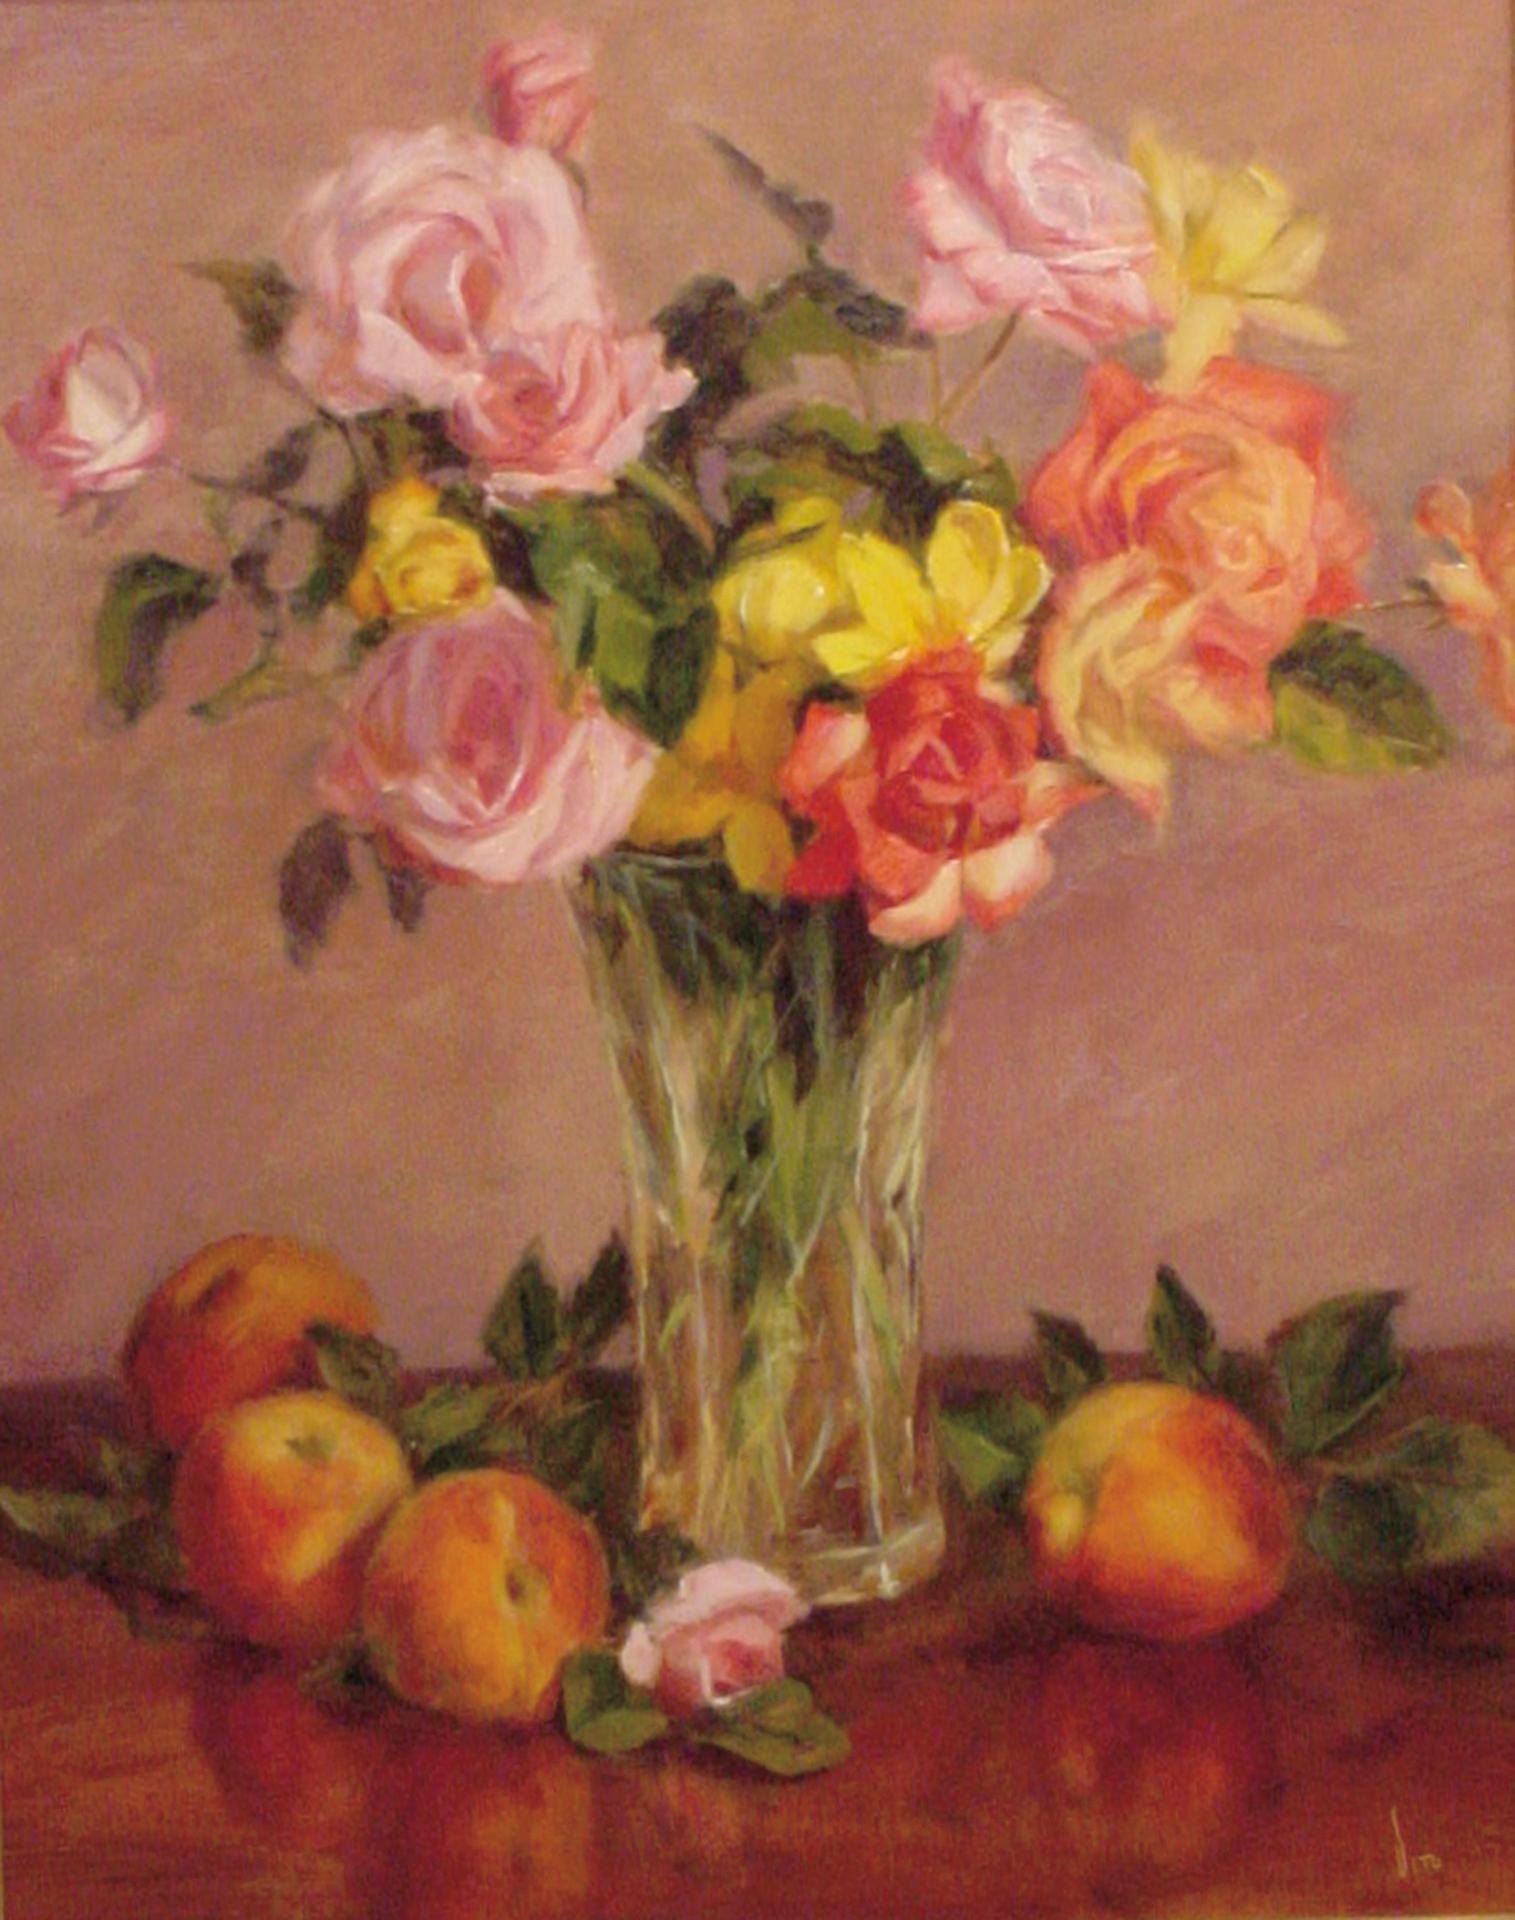 My Roses with Peaches - Painting by Teresa Vito